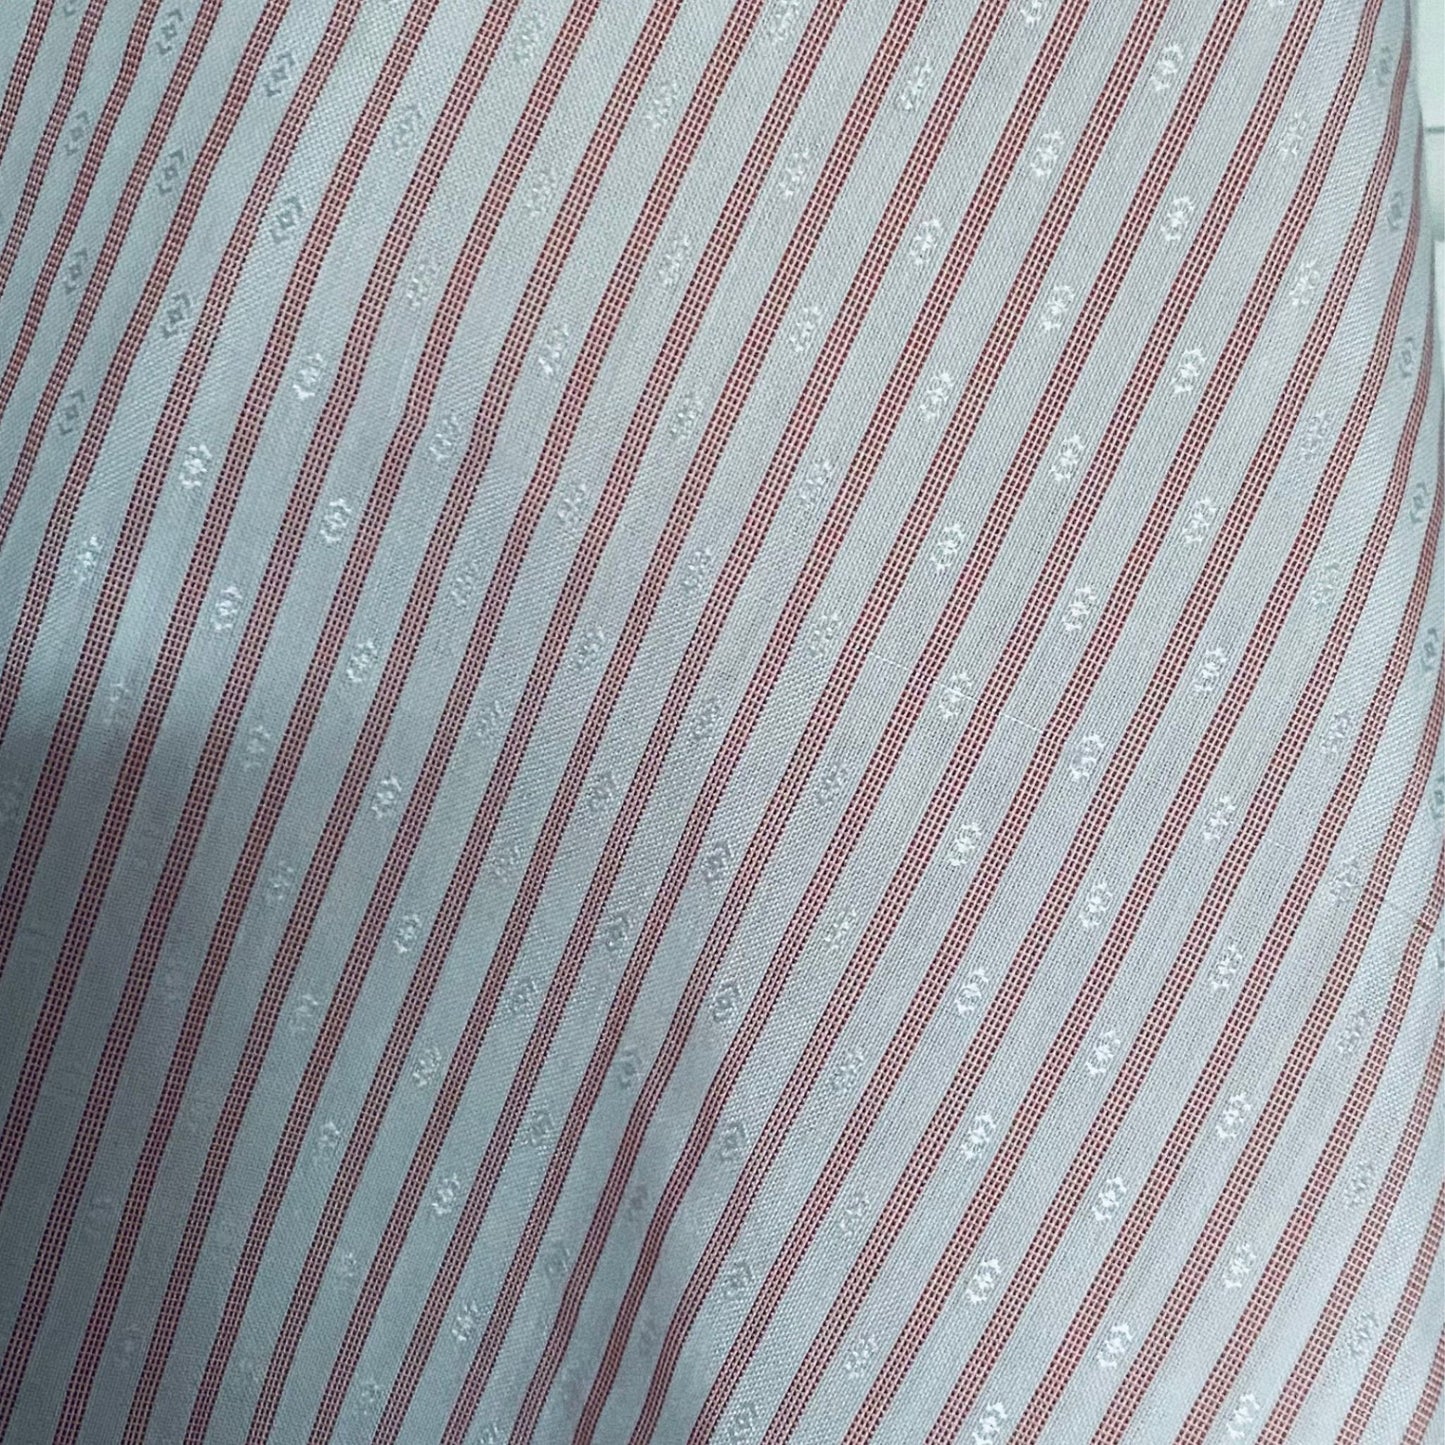 80s red and white striped tab collar blouse. Approx U.K. size 10-14